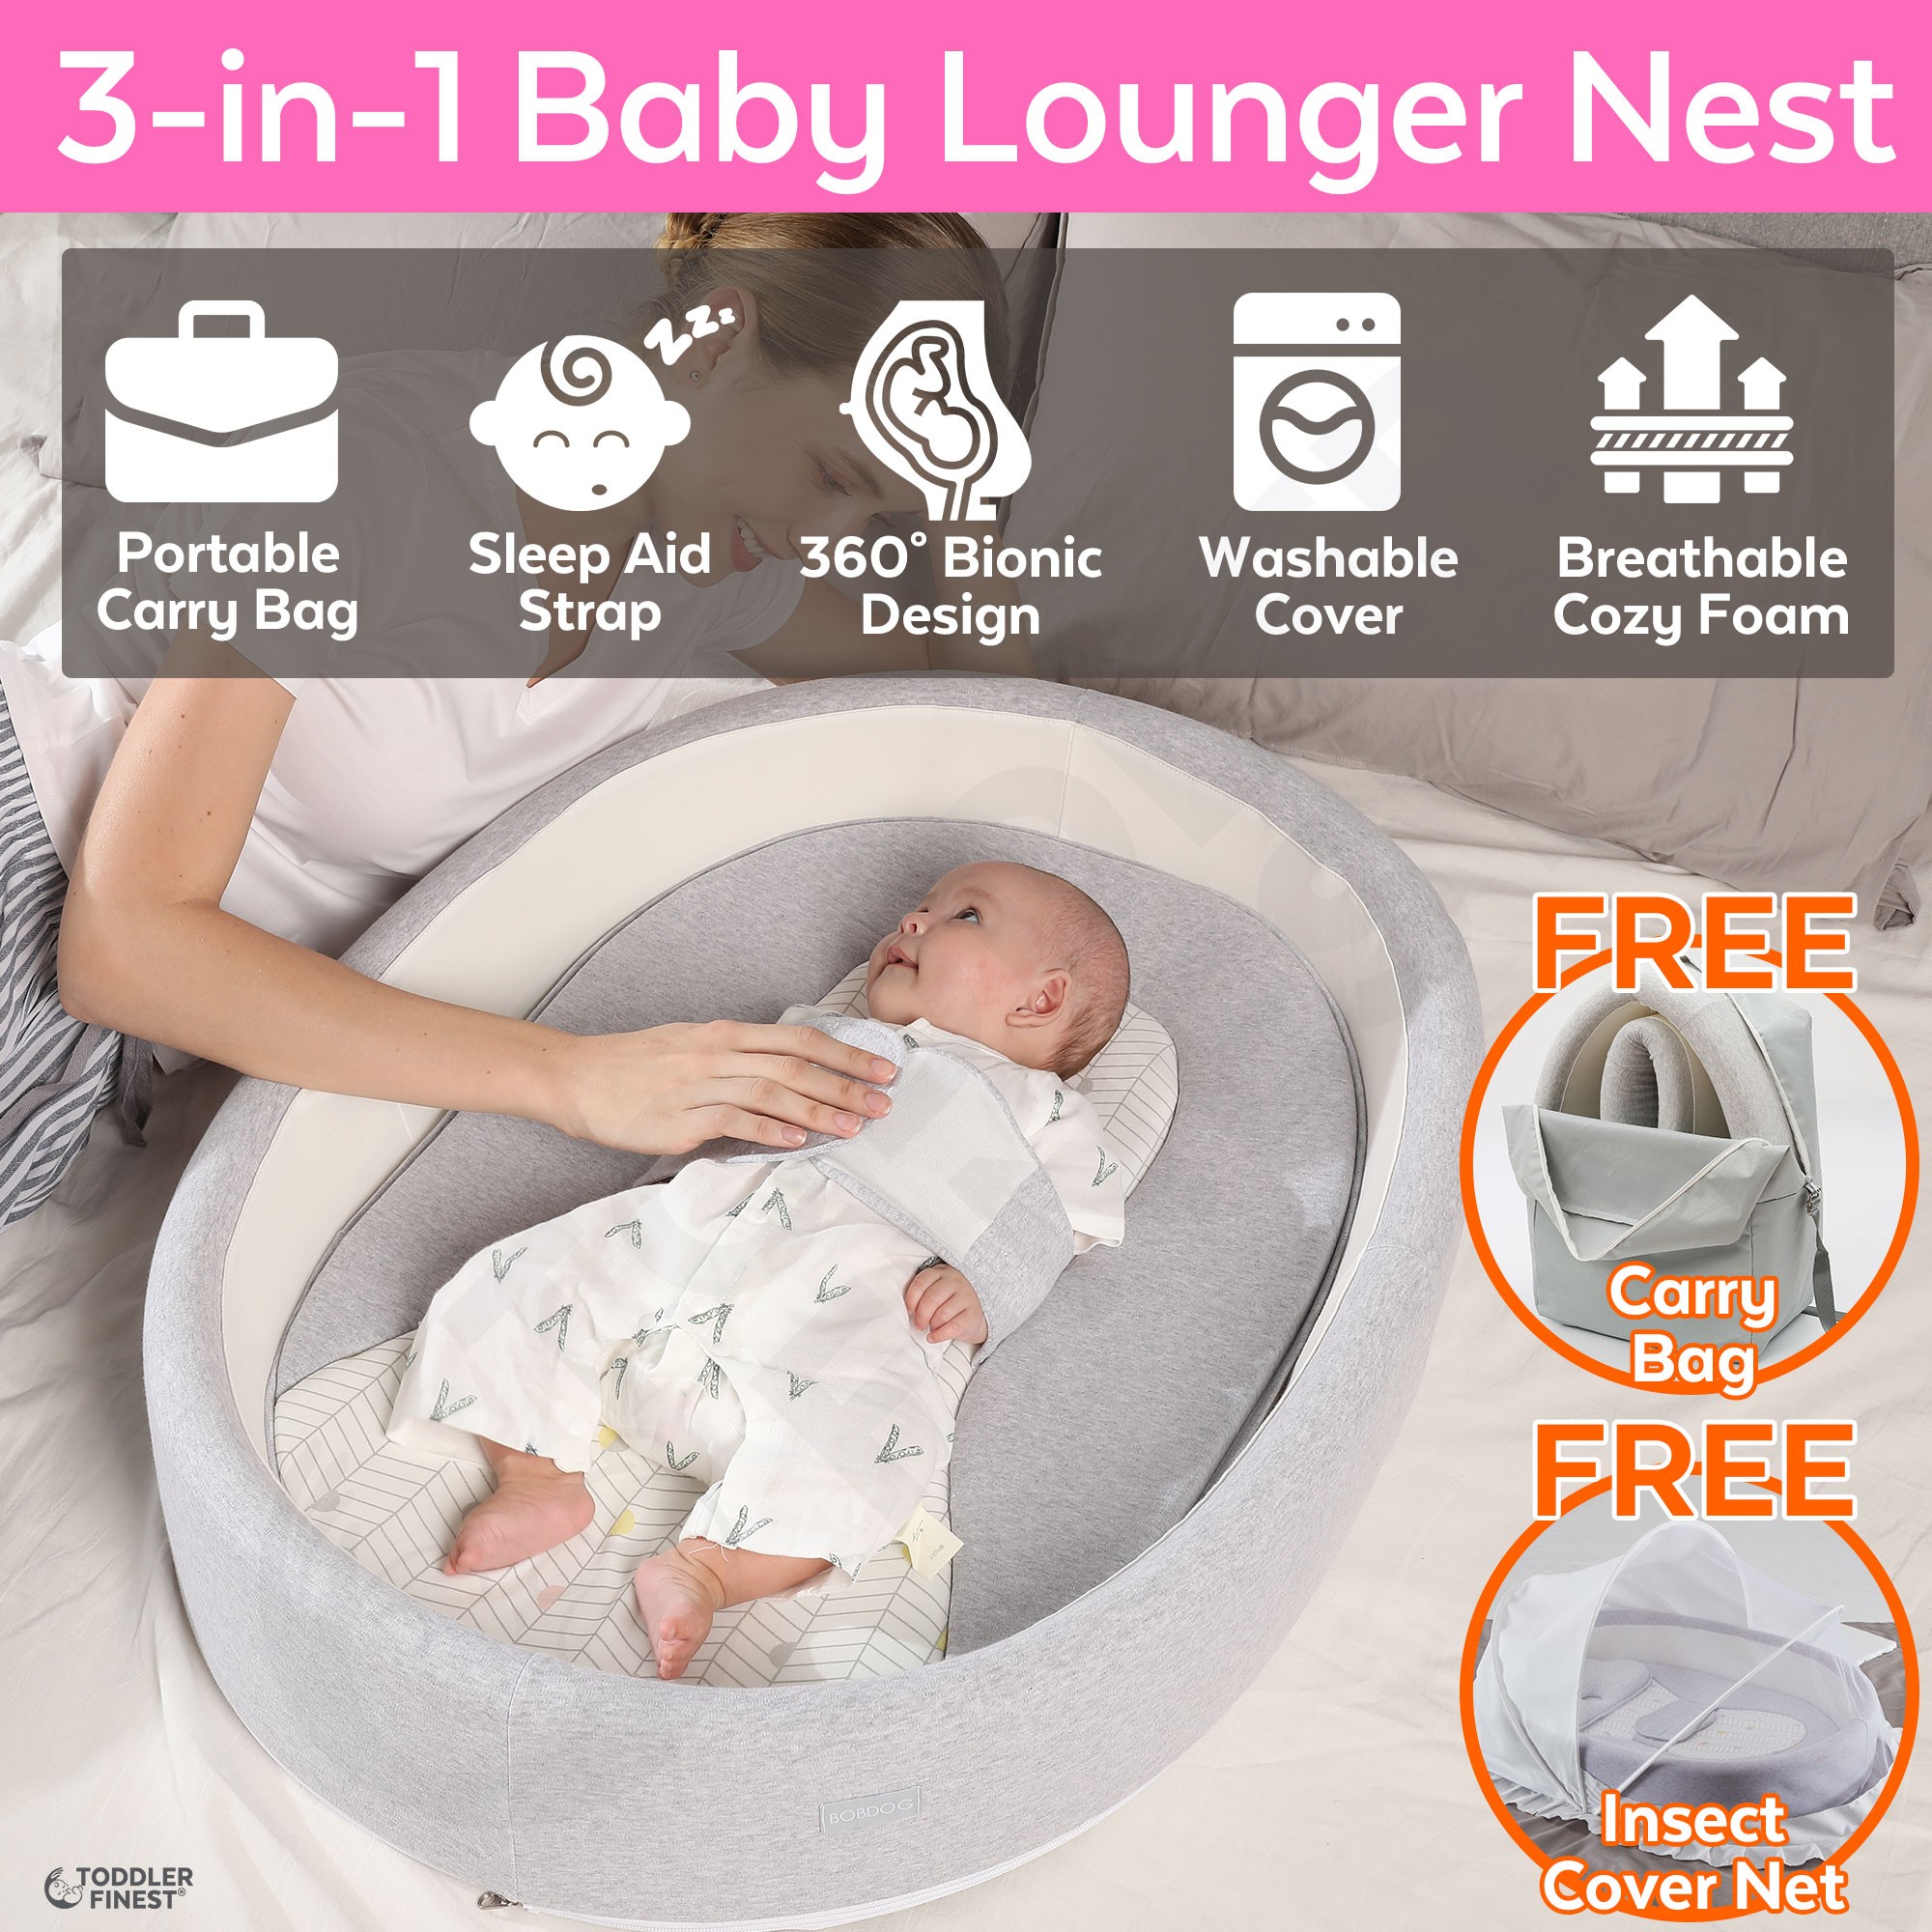 NIDONE Baby Recliner pod Breathable Cotton Baby Sleeping pad Bed Removable Portable Crib with Pillow Style4